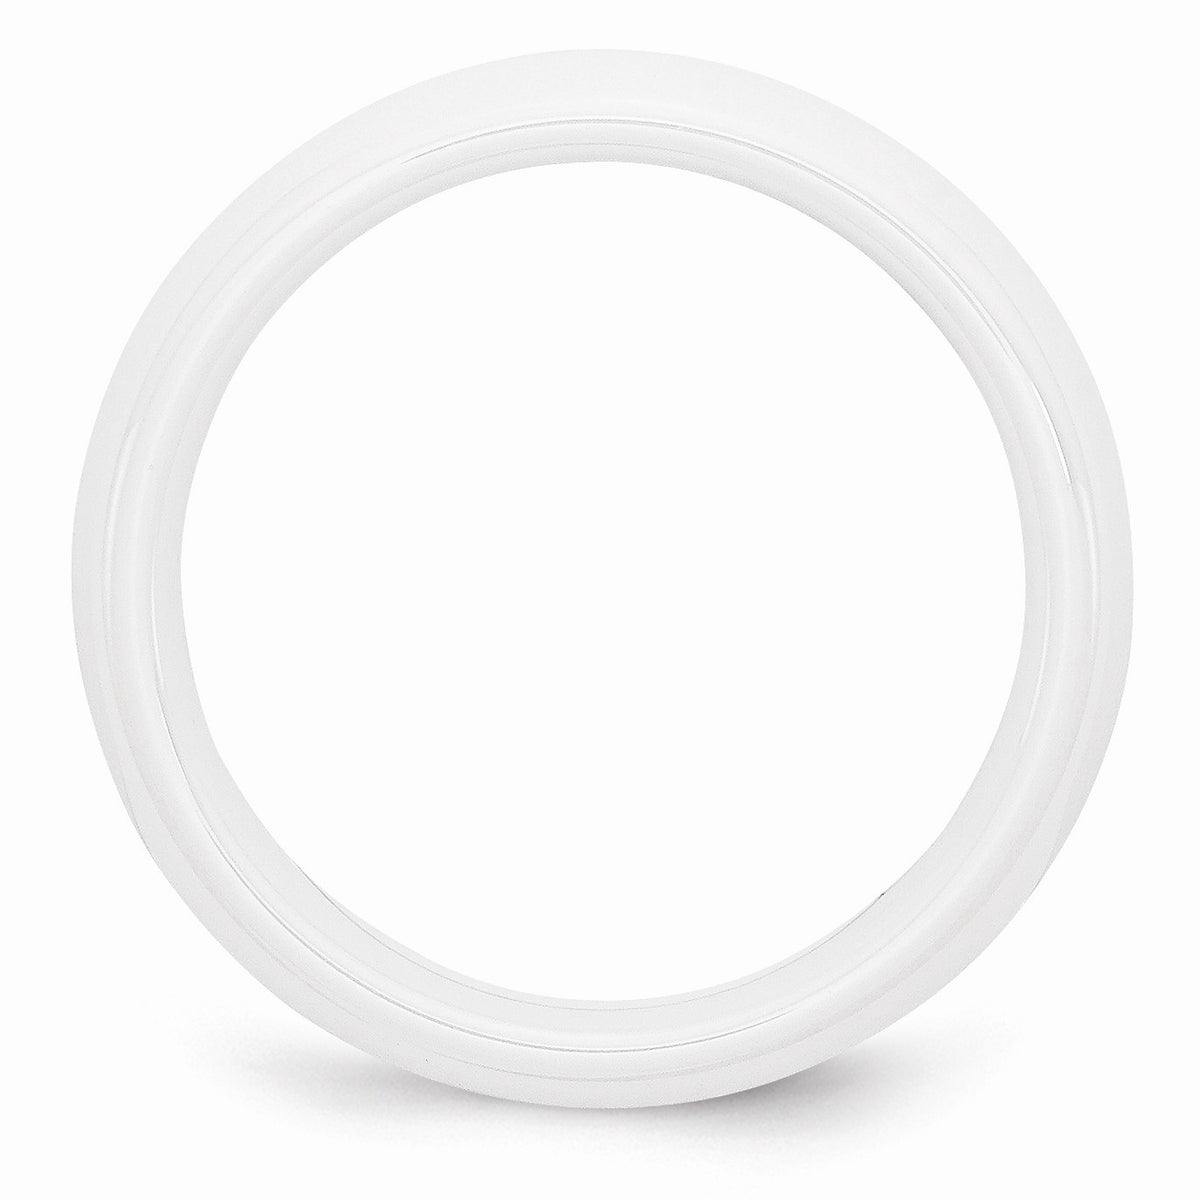 Alternate view of the White Ceramic, 6mm Polished Domed Comfort Fit Band by The Black Bow Jewelry Co.